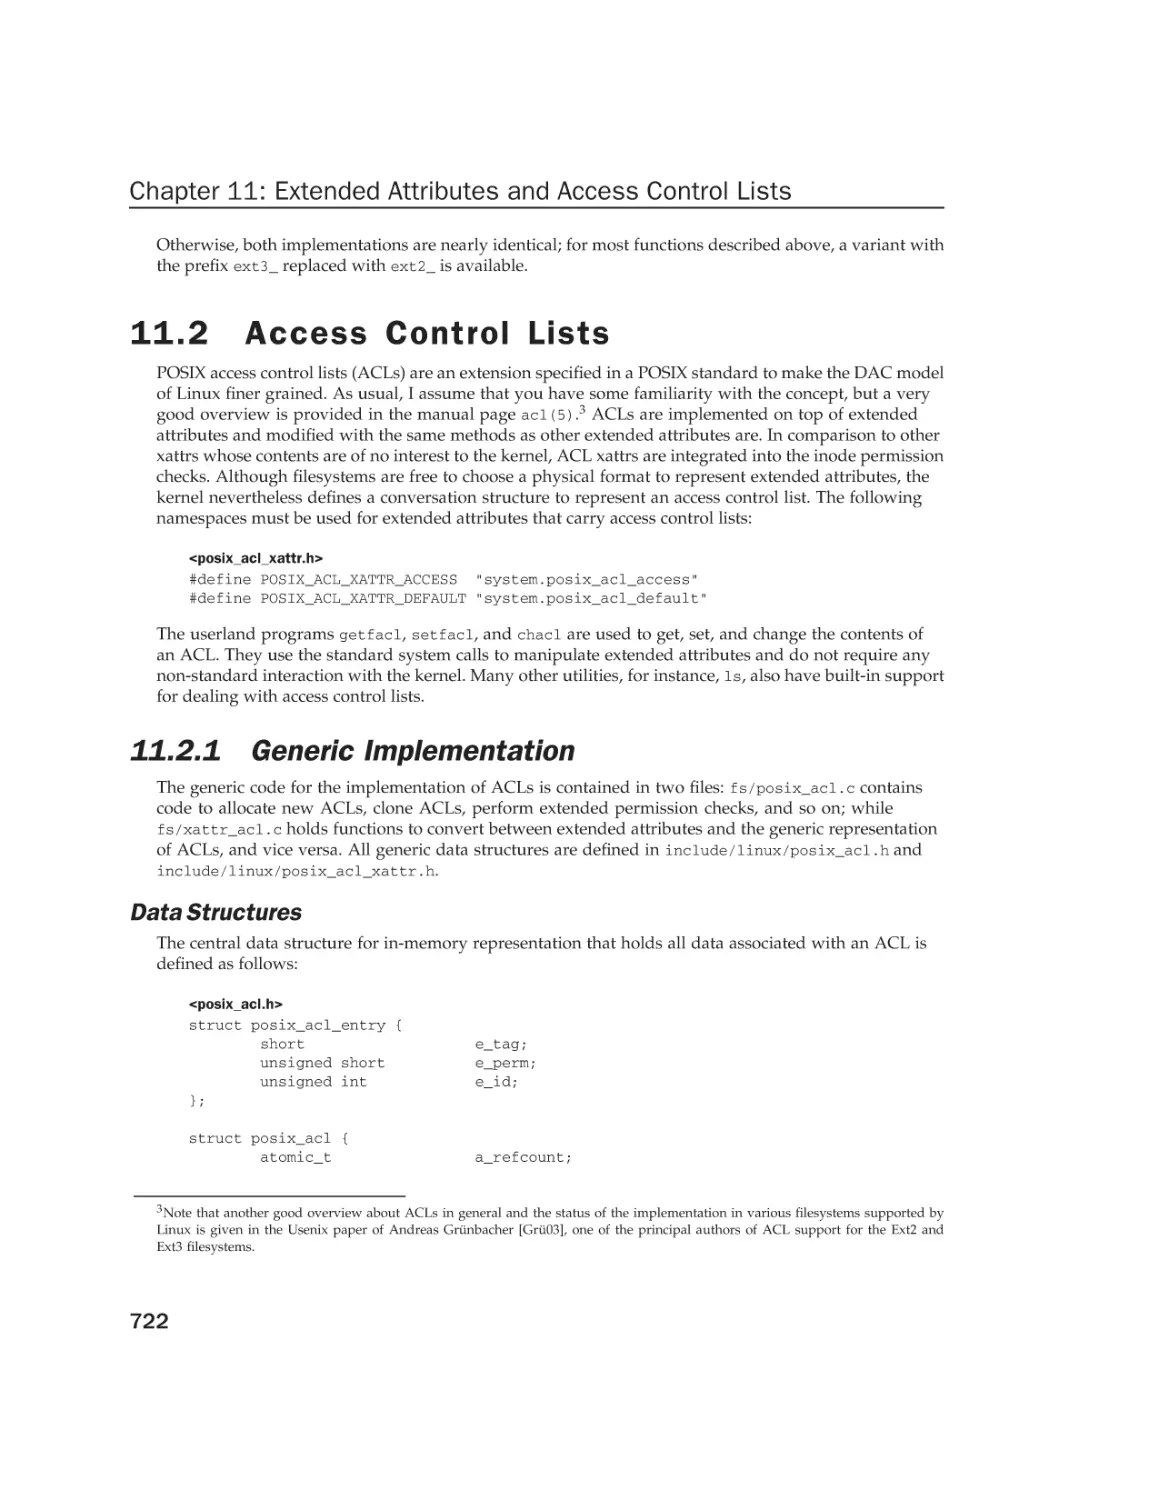 11.2 Access Control Lists